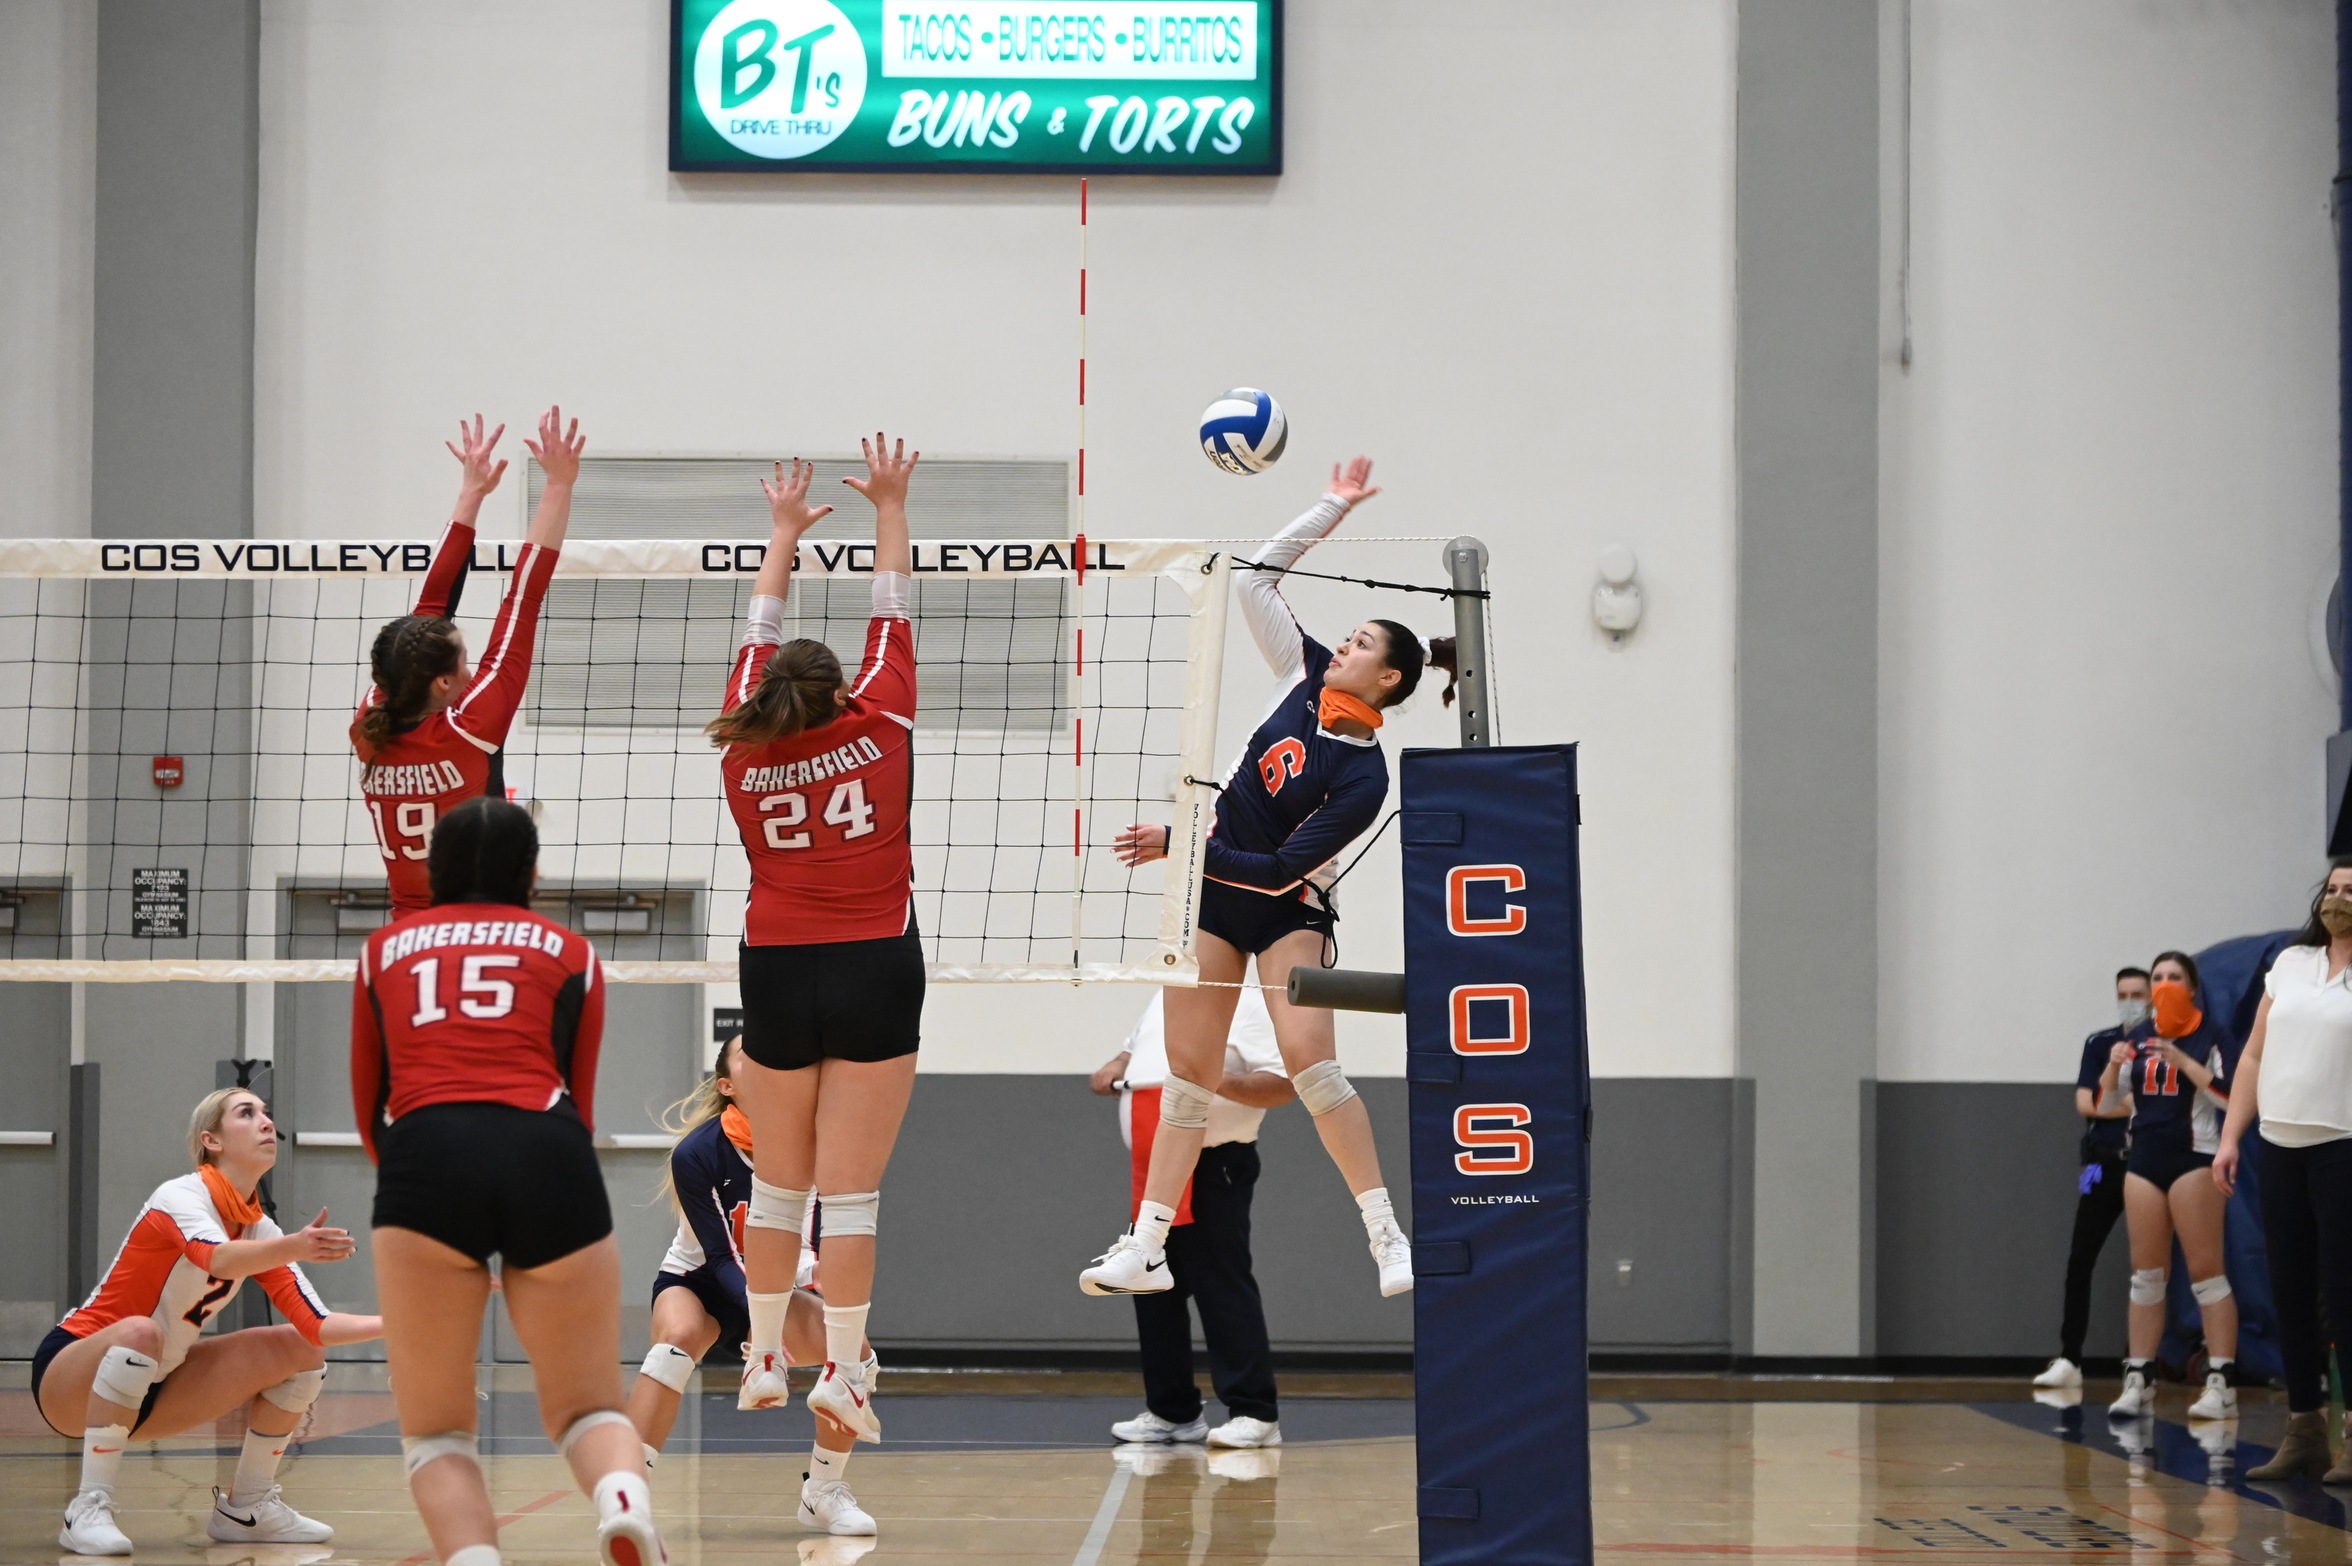 Strong finish caps successful weekend for Giants volleyball team